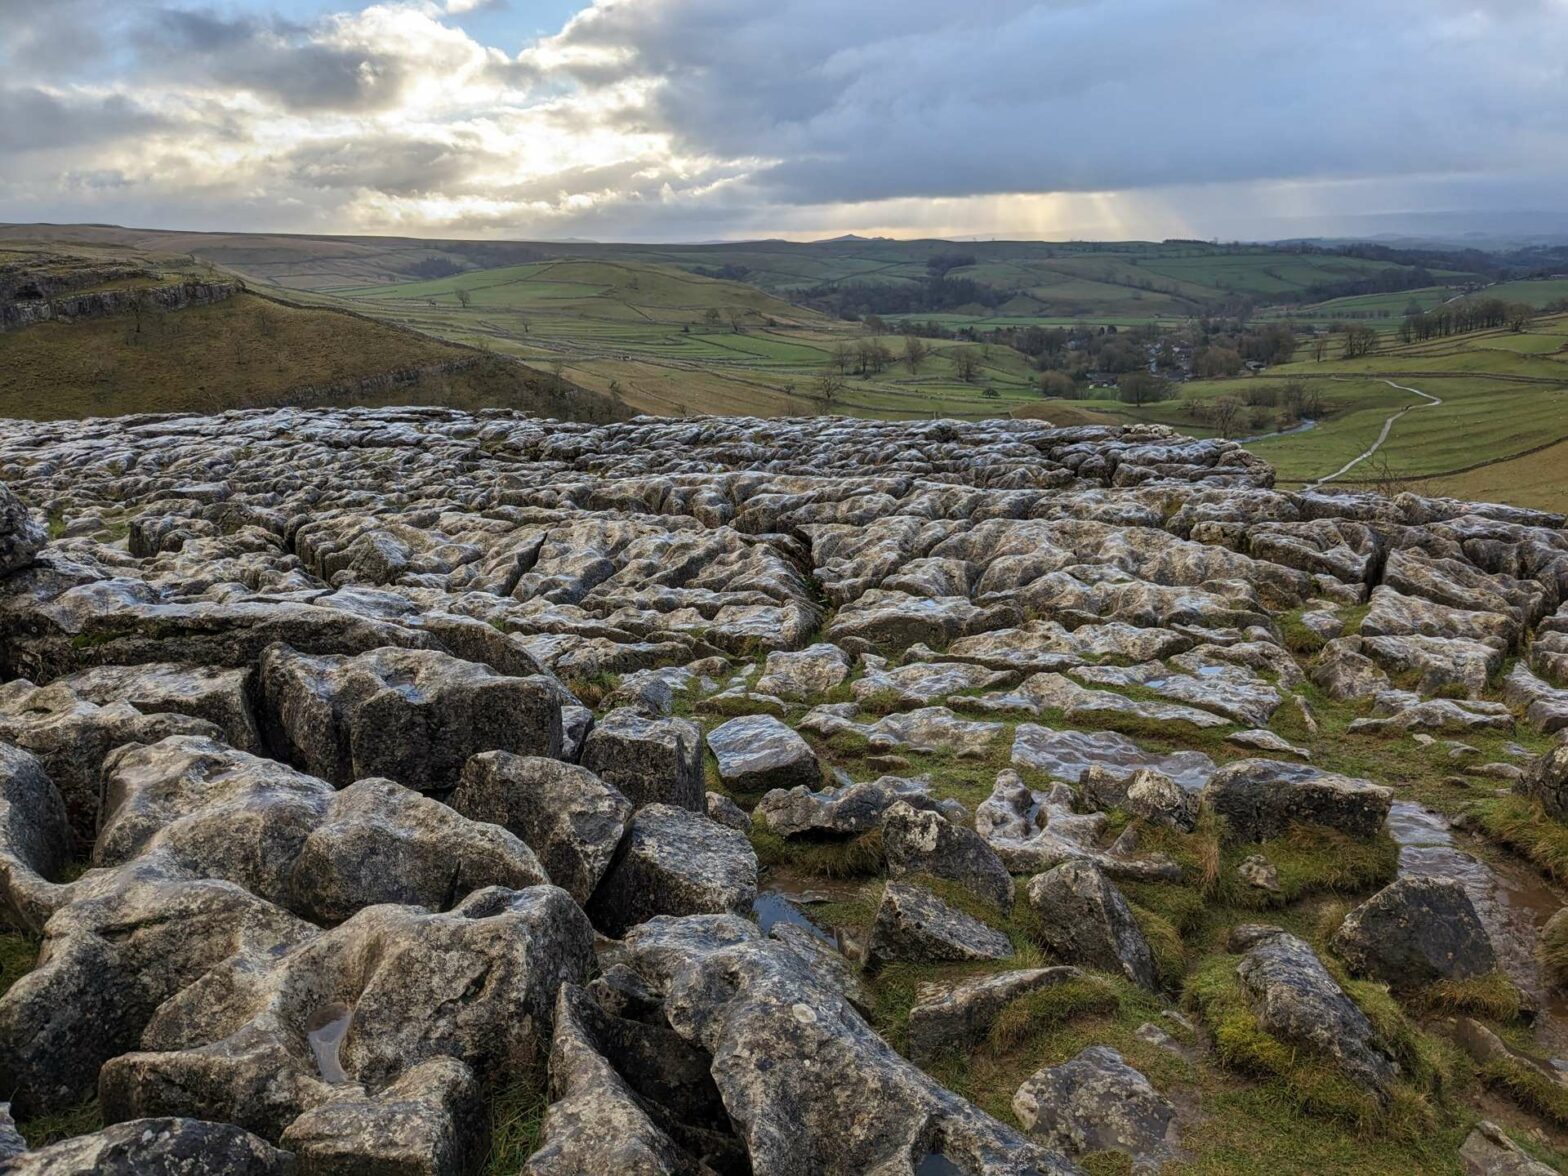 Limestone pavement at the top of Malham Cove in the Yorkshire Dales